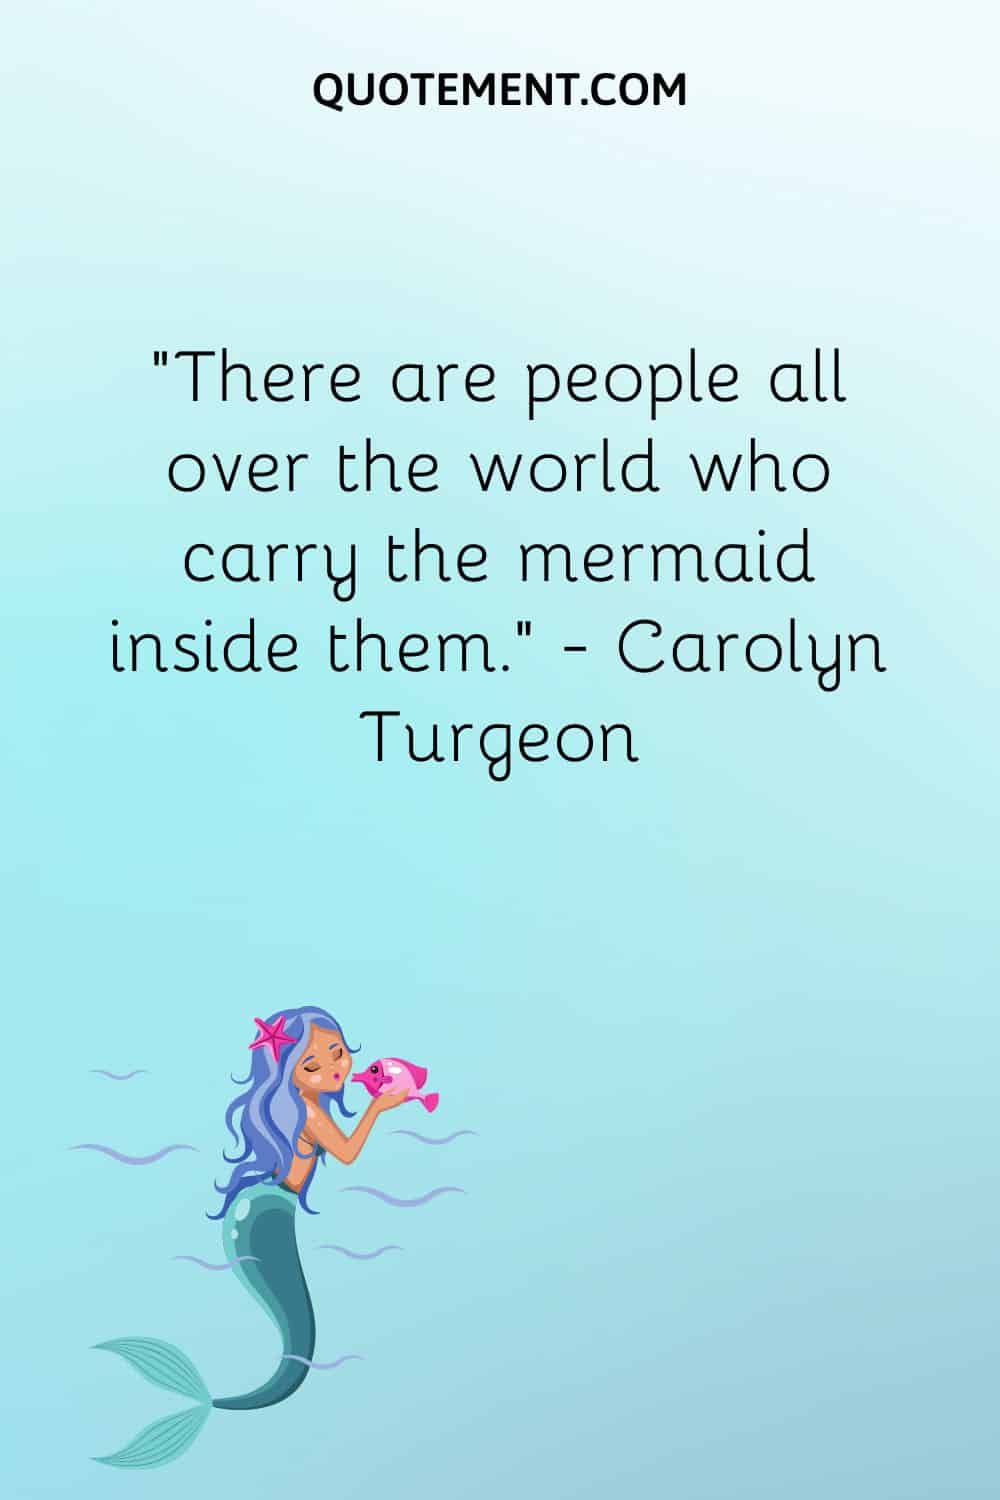 quotes from little mermaid